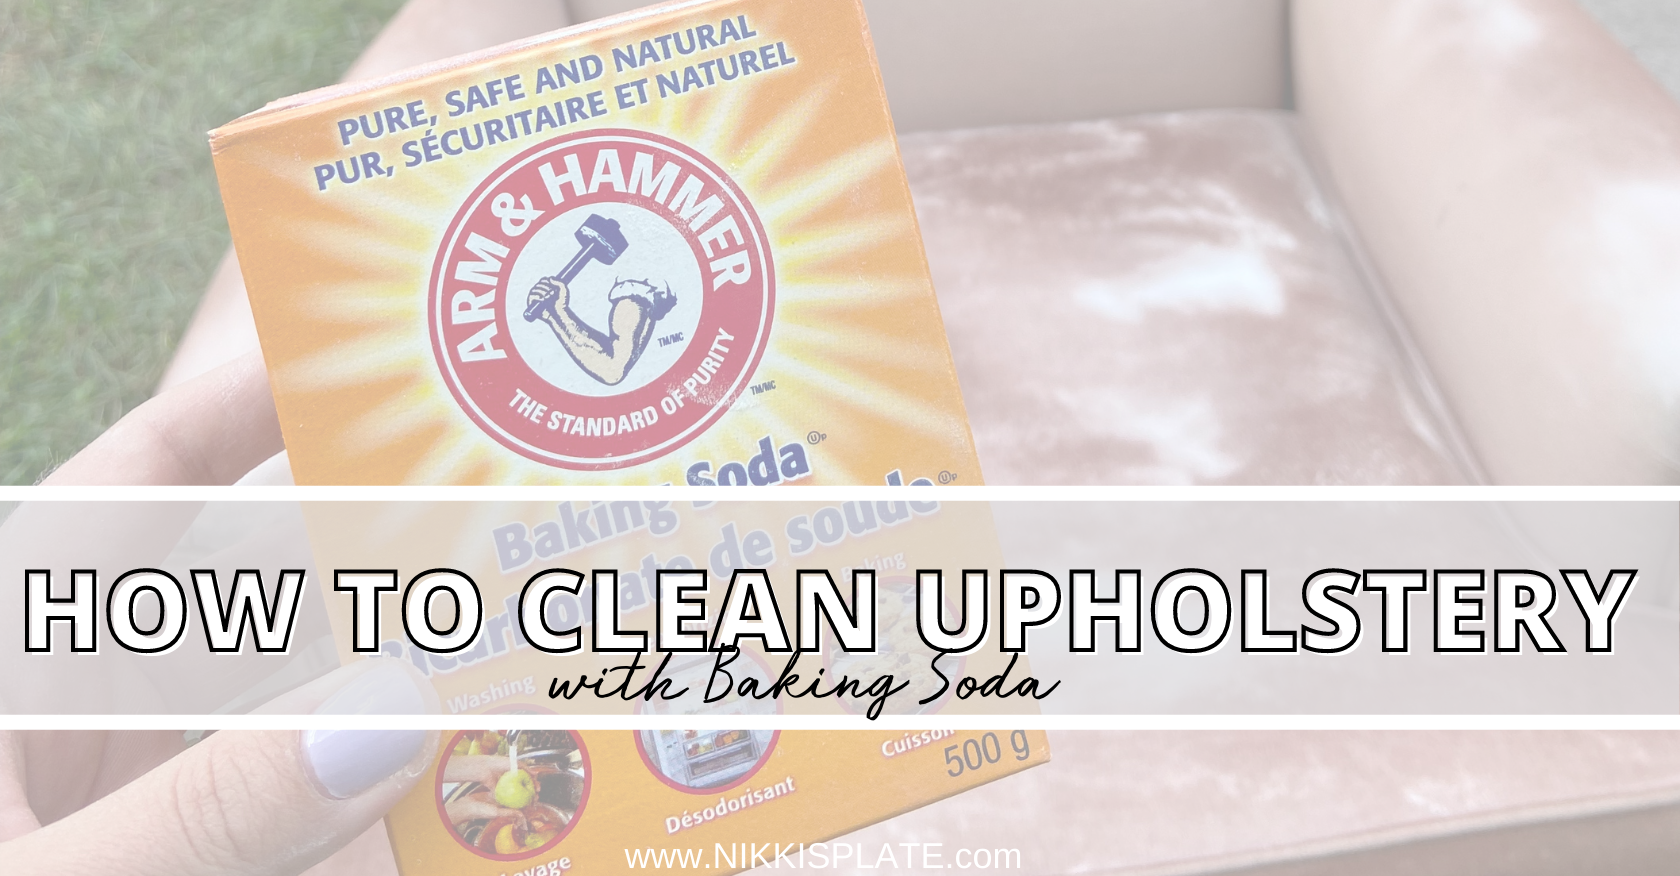 How To Clean Upholstered Chairs with Baking Soda; Learn how to clean upholstery chairs with baking soda to remove spills from kids, food stains, dirt, odors from pets, and other smudges/stains!